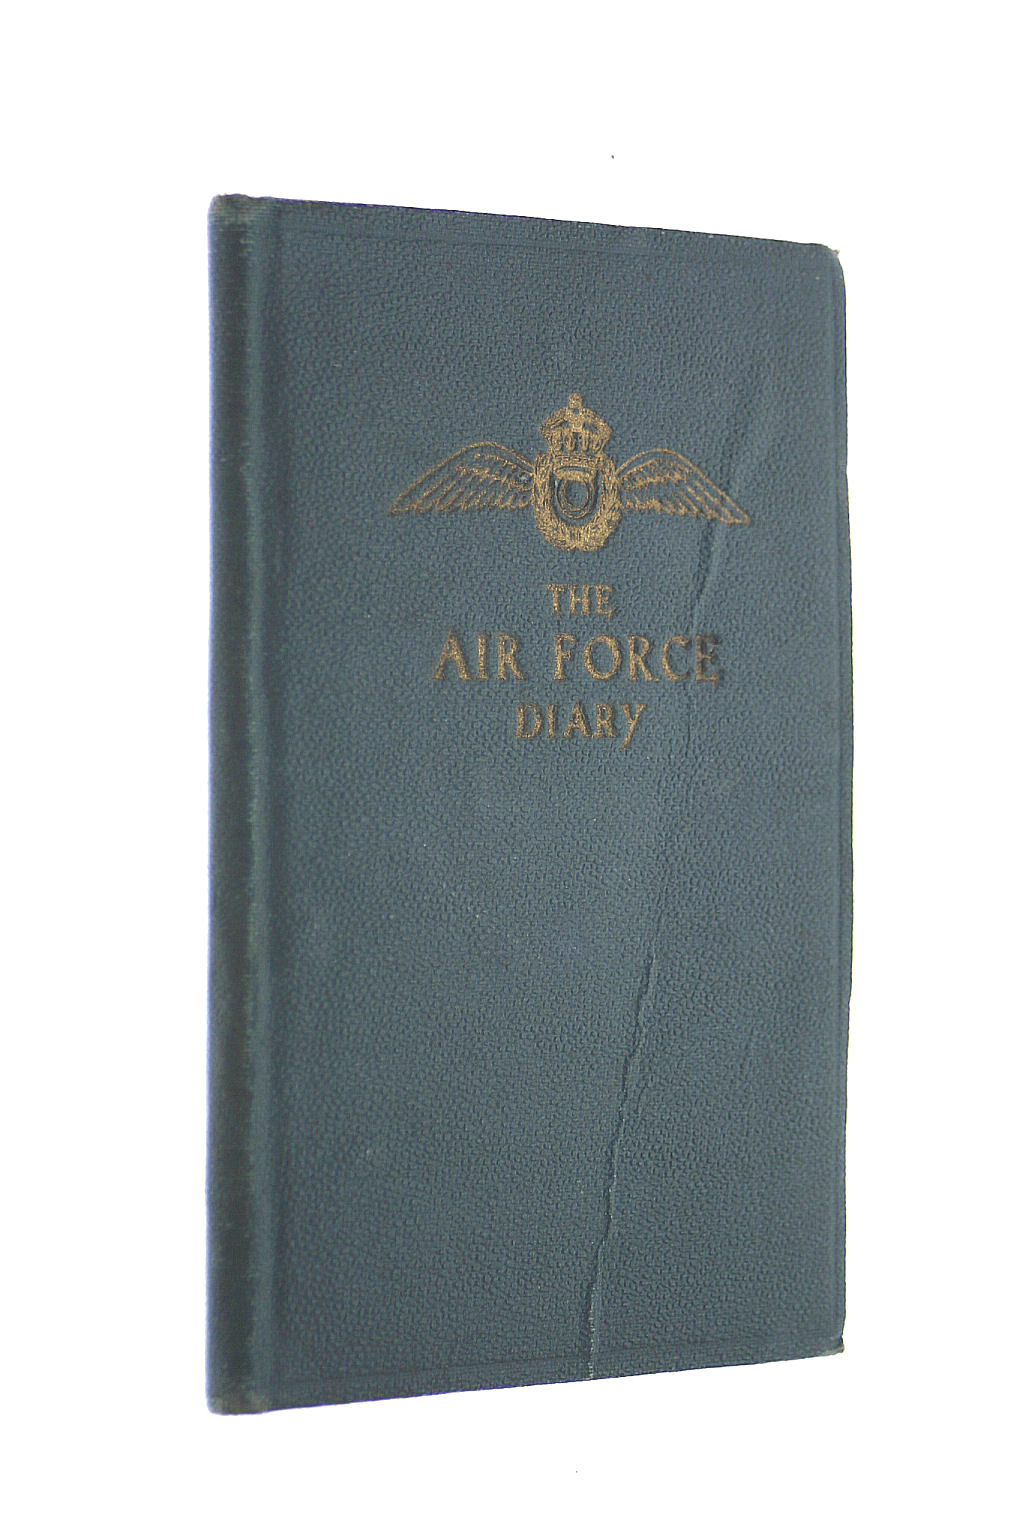 ANON - The Air Force Diary 1945